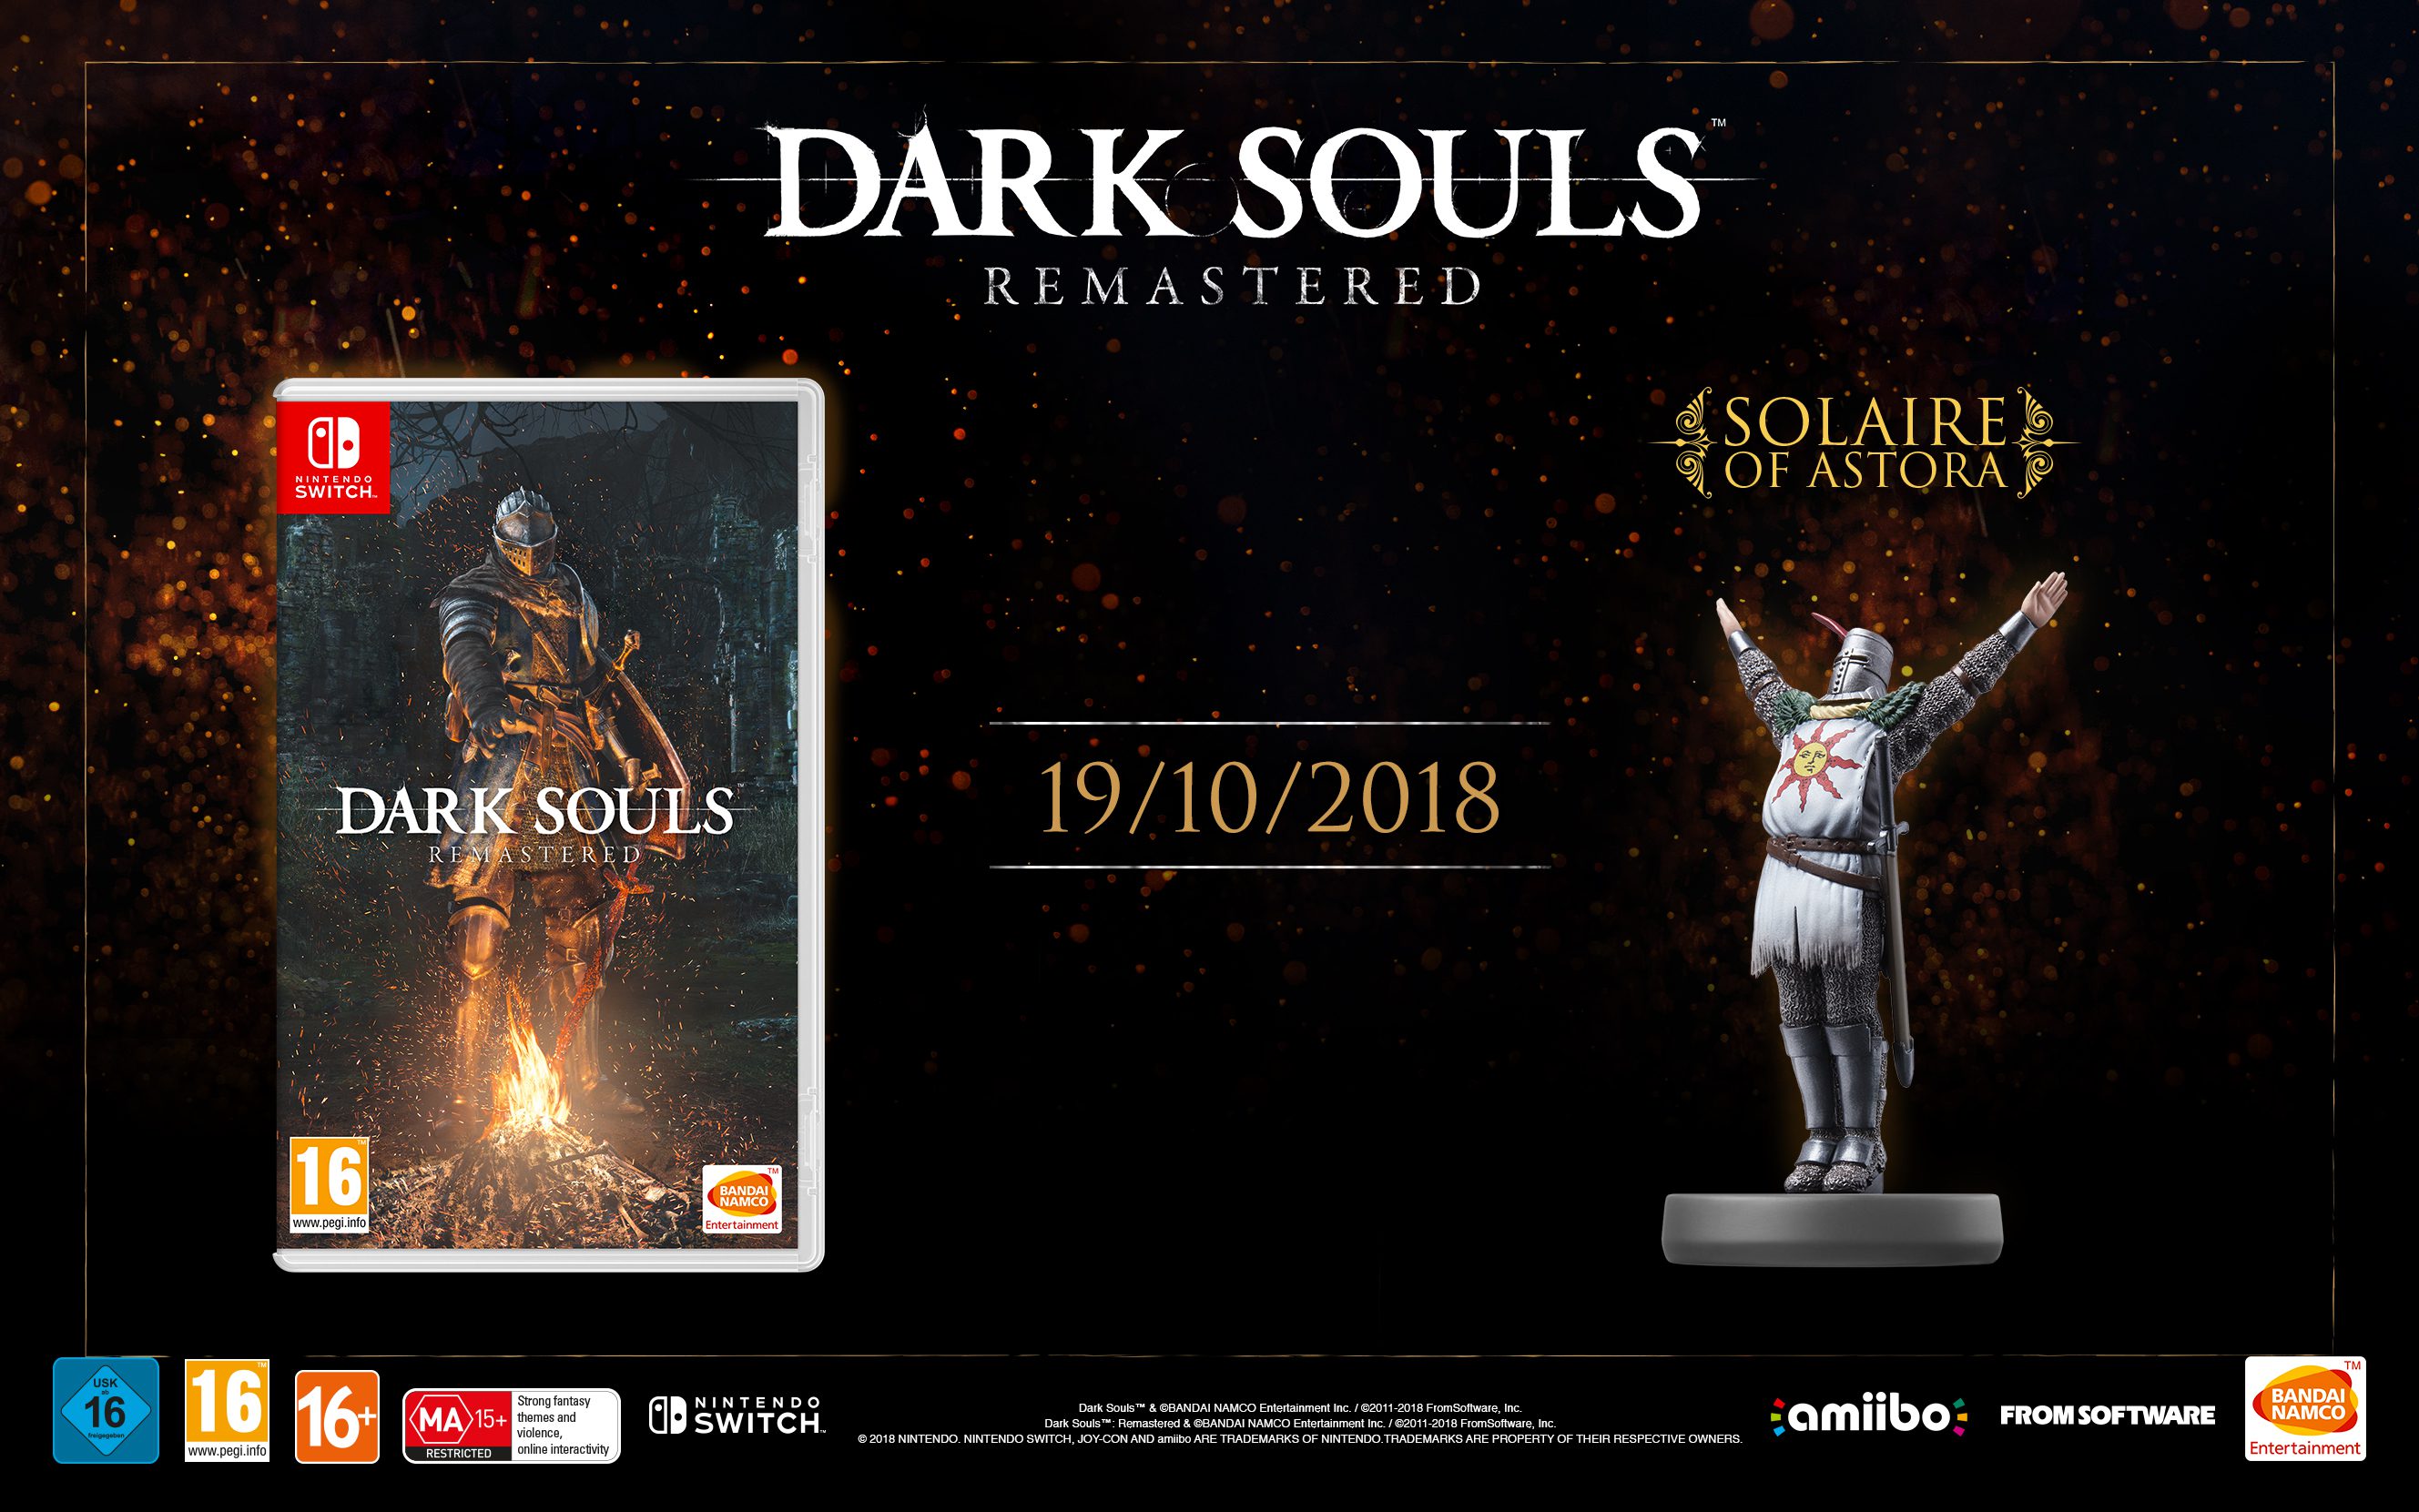 DARK SOULS: Remastered hits Nintendo Switch today